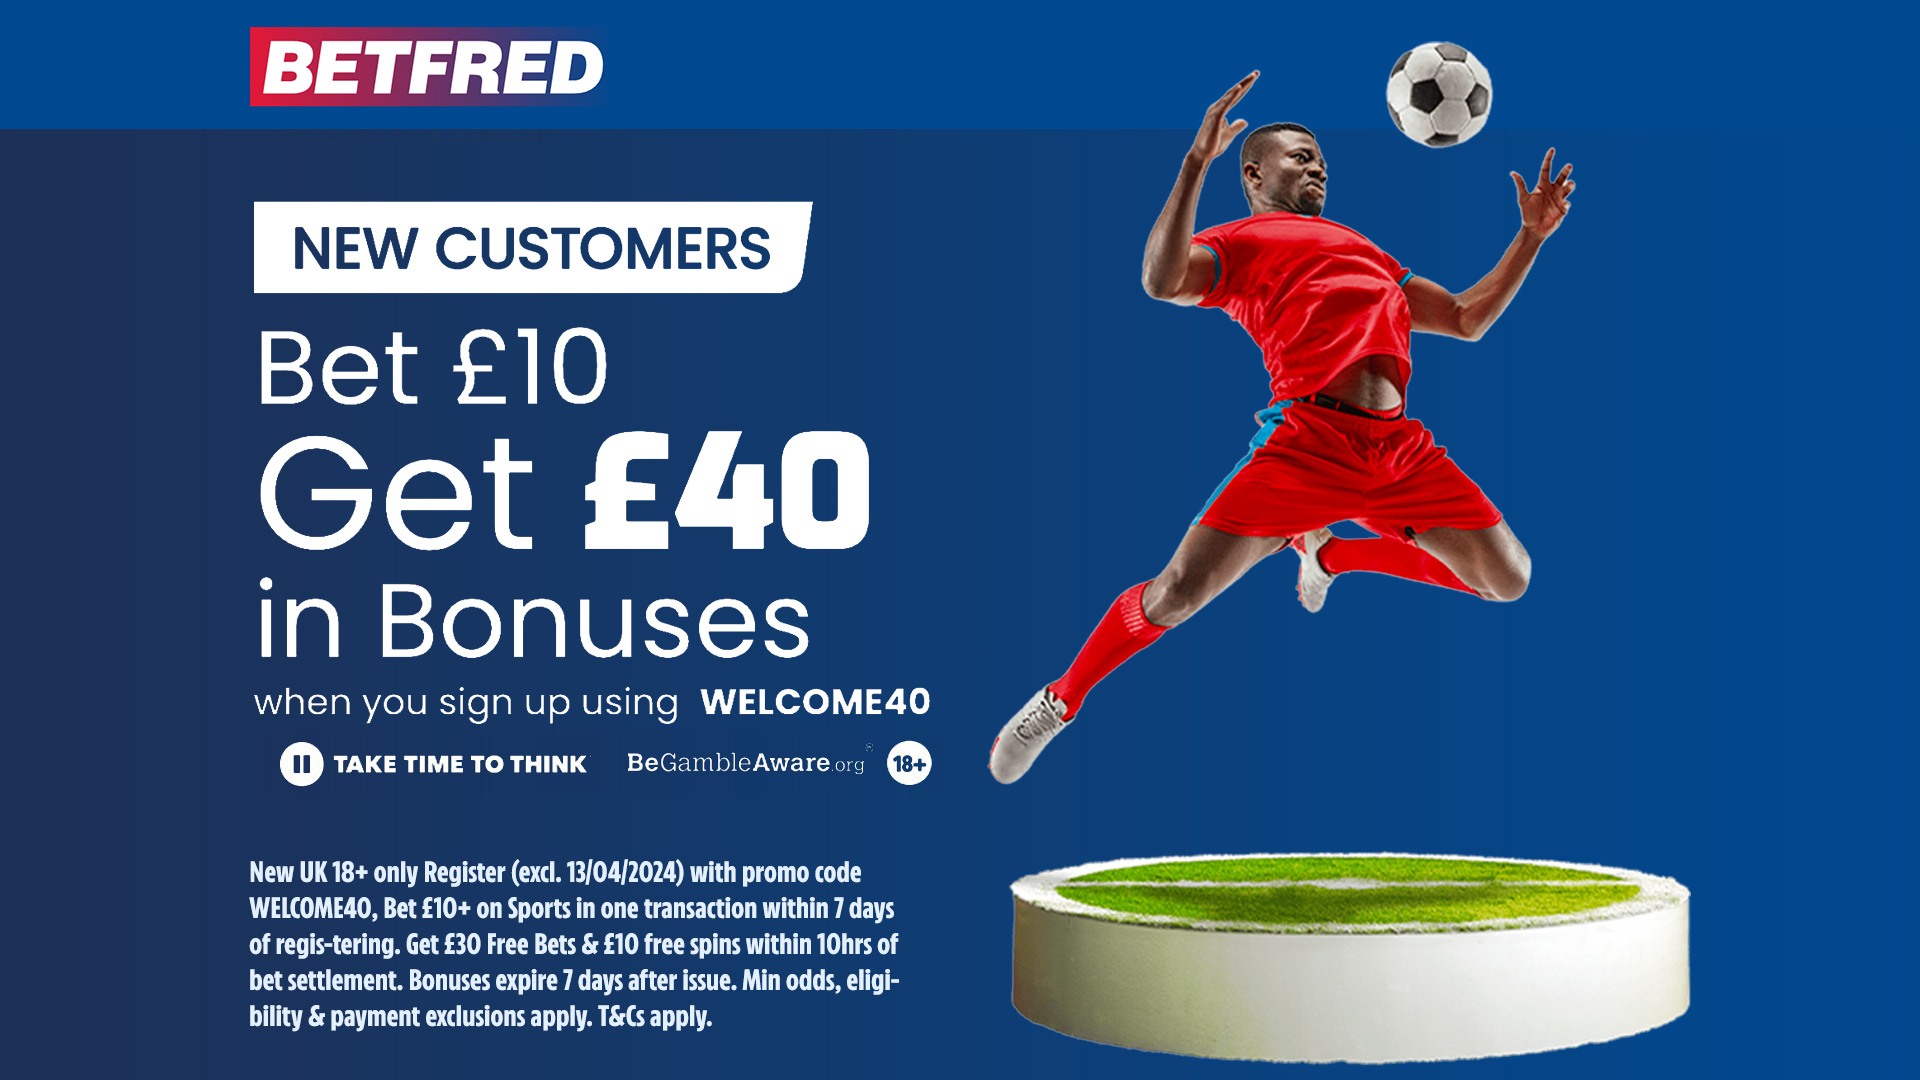 Real Sociedad vs PSG: Get £40 in free bets and bonuses for the Champions League with Betfred